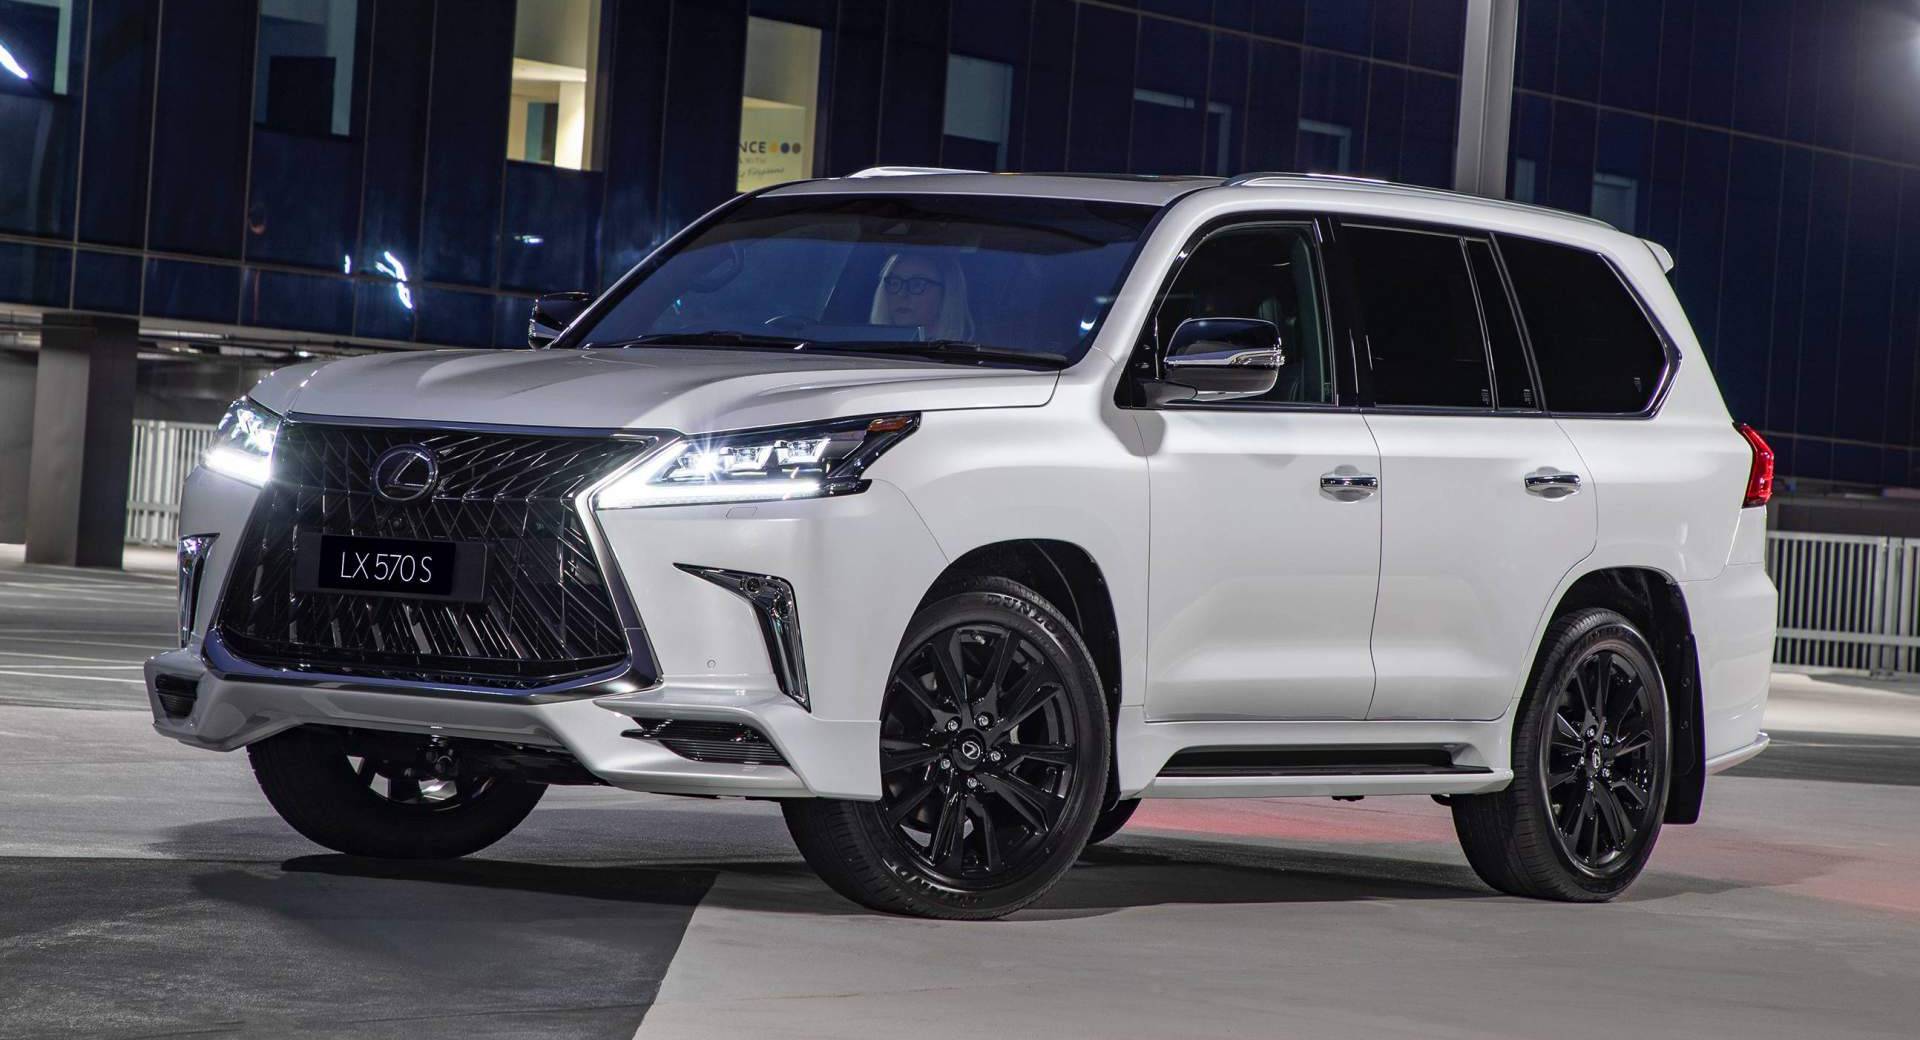 New Lexus LX 570 S Goes Official In Australia For A Whopping AU$168,089 ...